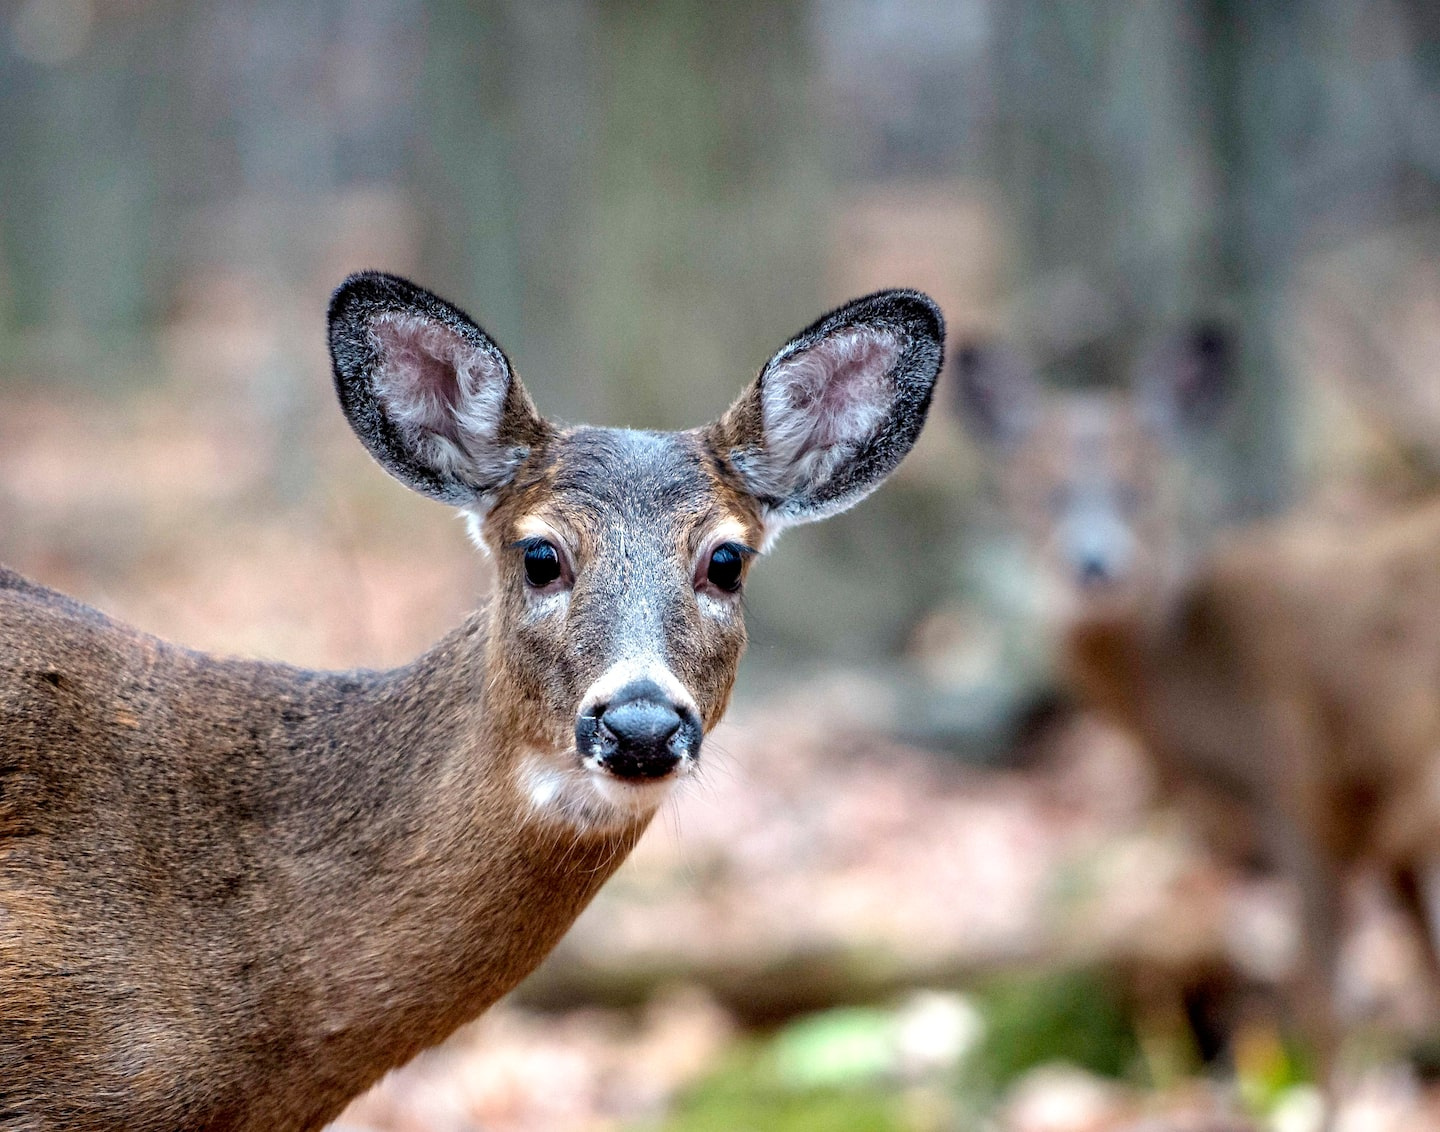 A hunt planned for the fall to control the Longueuil deer population